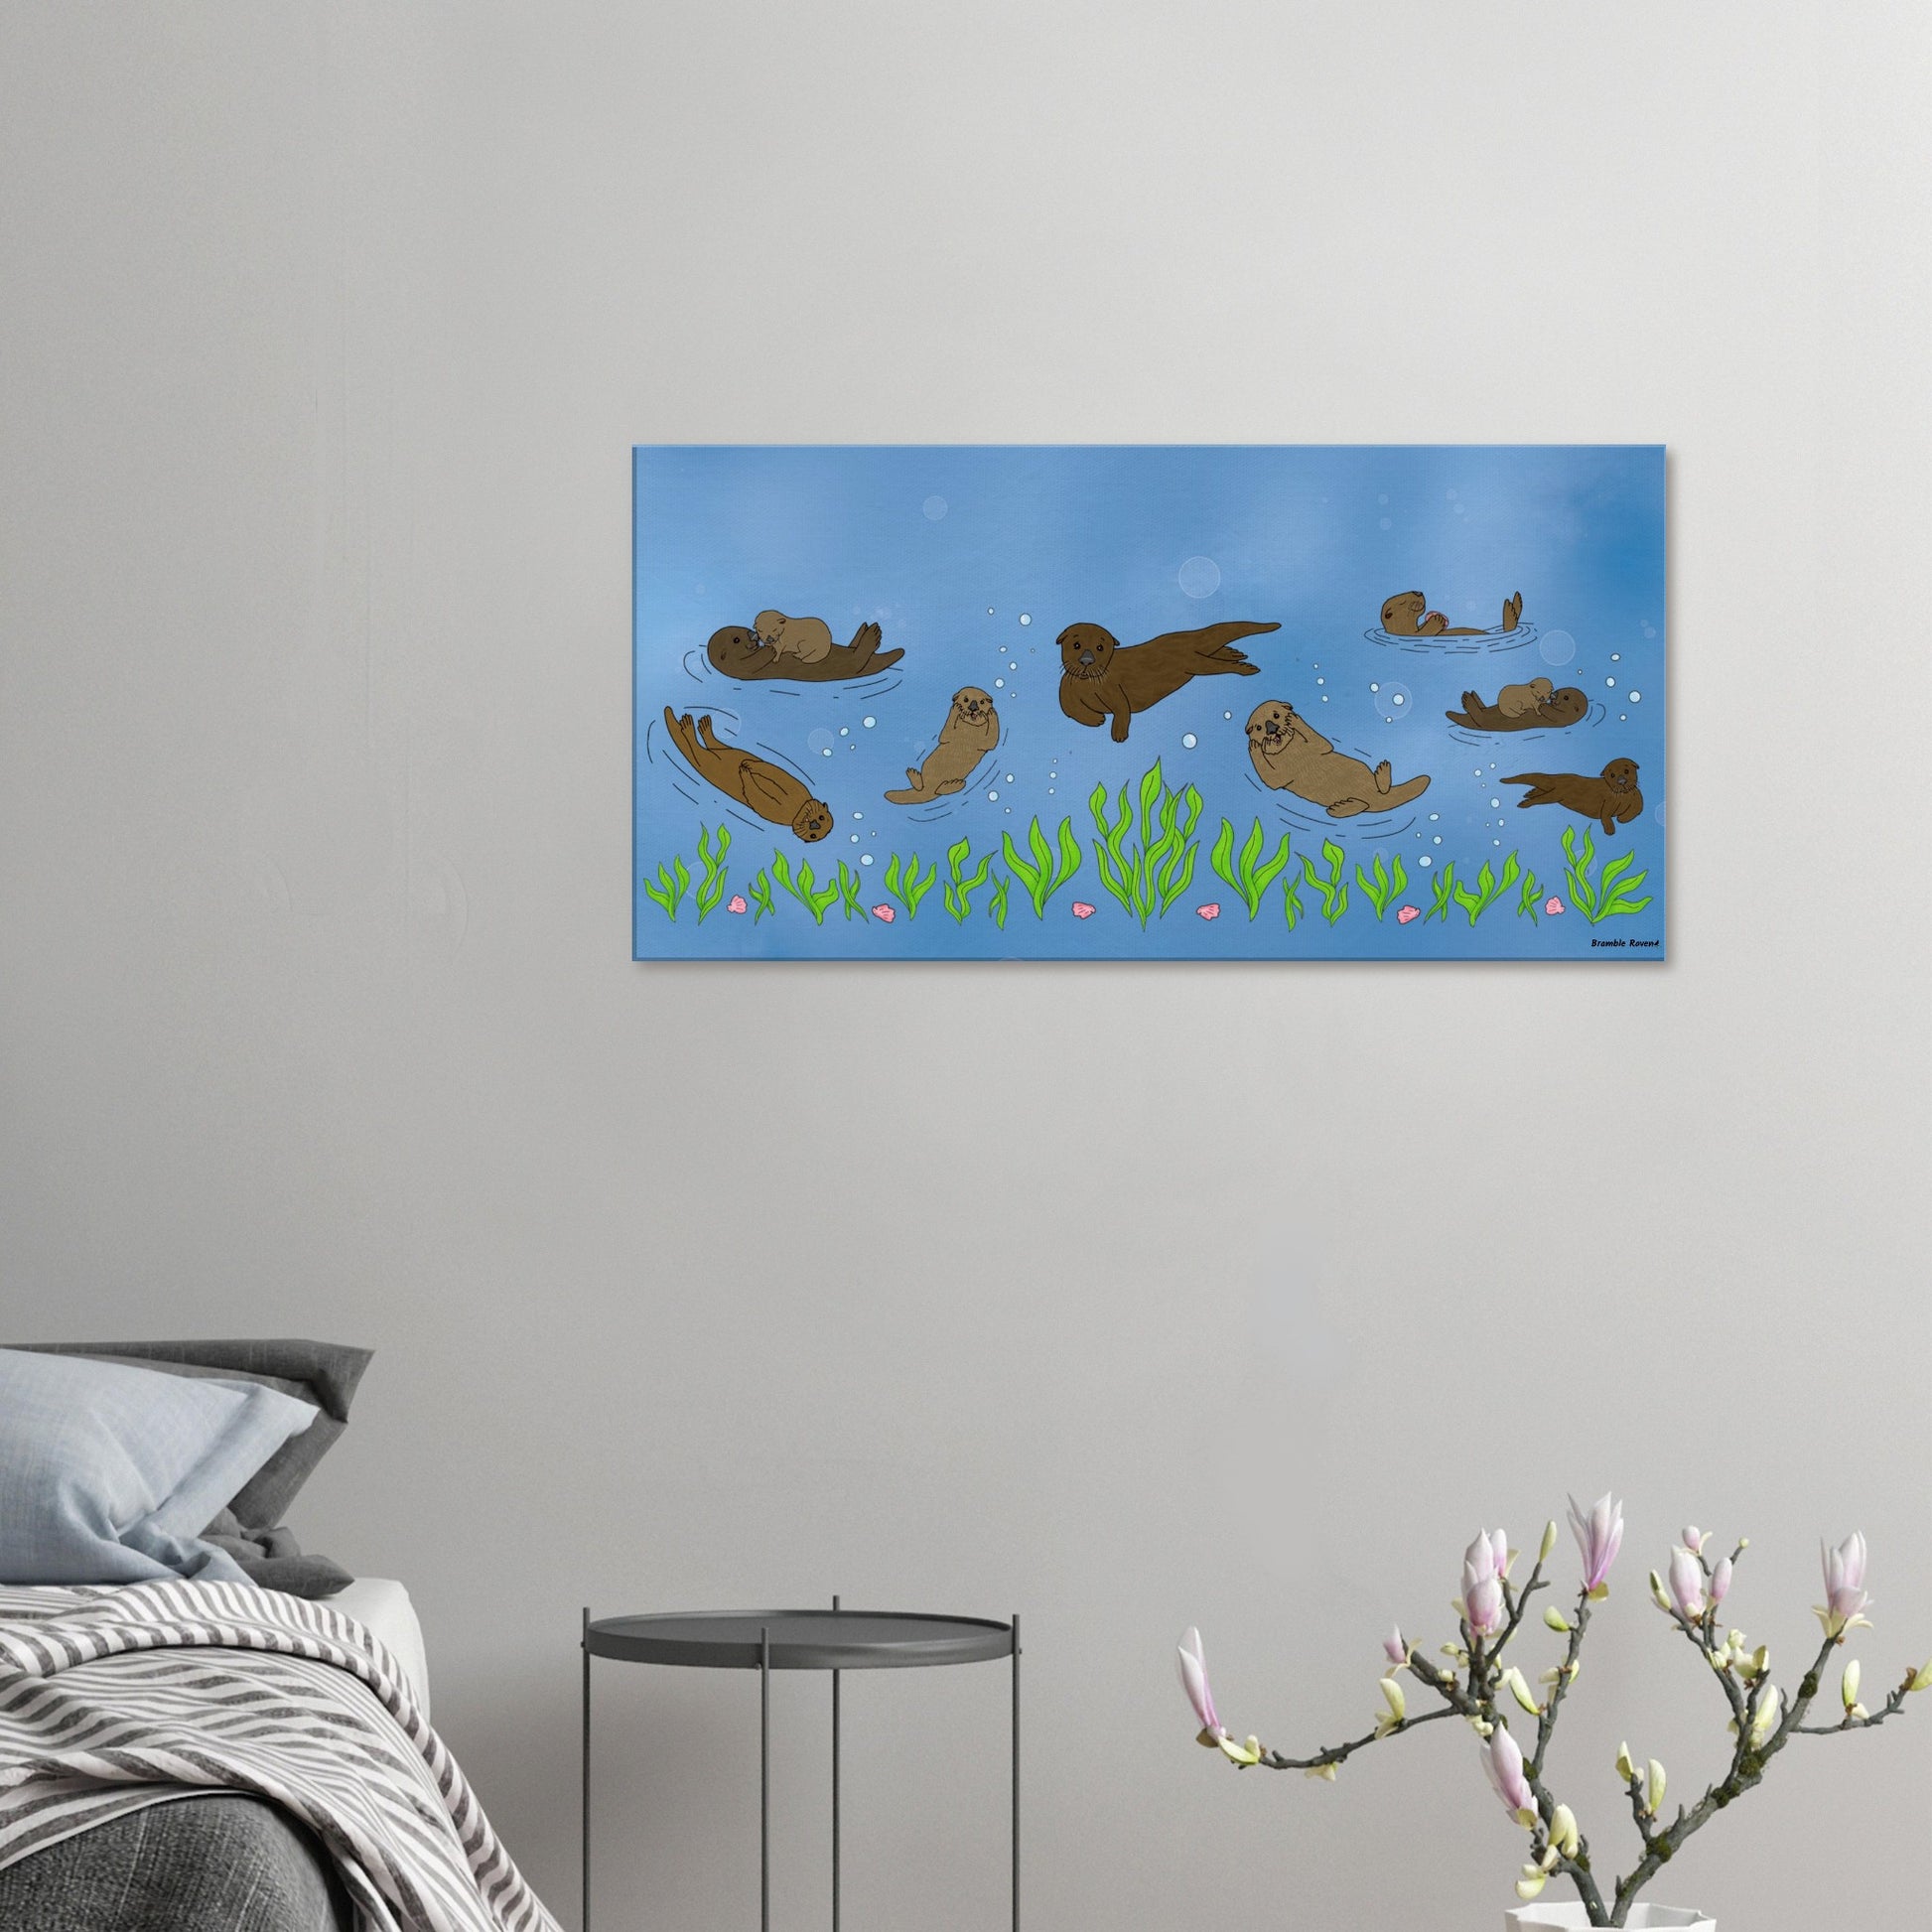 20 by 40 inch slim canvas wall art print of sea otters swimming along the seabed. Shown on wall above grey nightstand, grey bed, and budding flower decor.